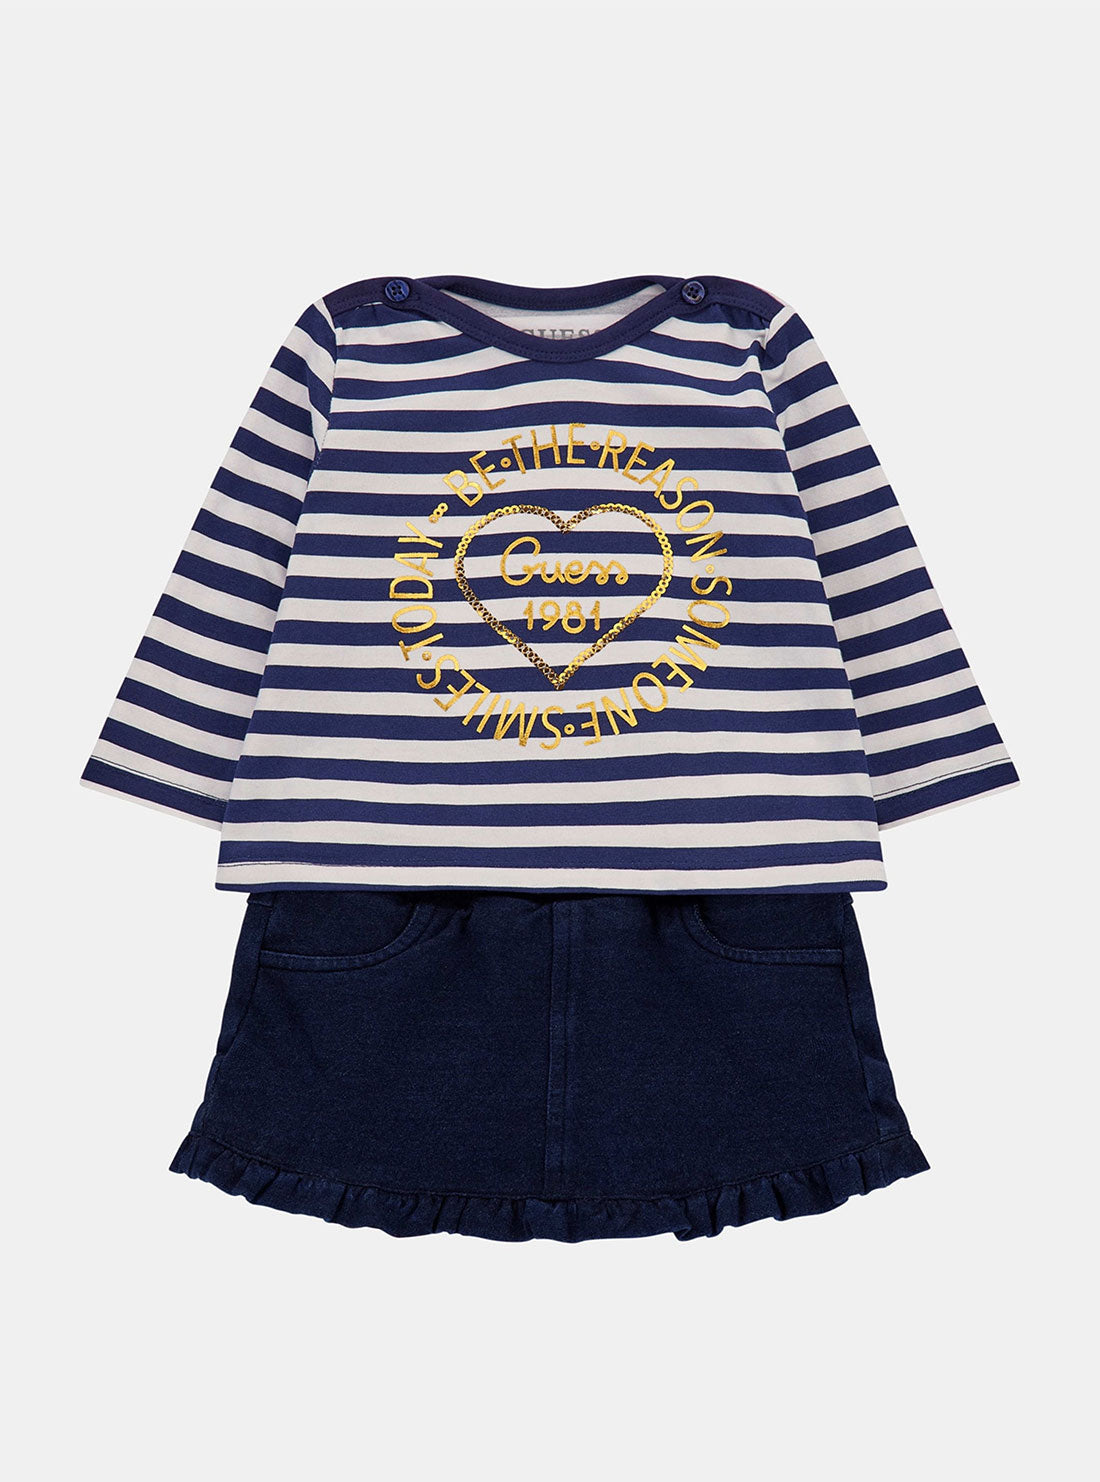 GUESS Navy White Long Sleeve and Denim Skirt Set (3-18M) front view